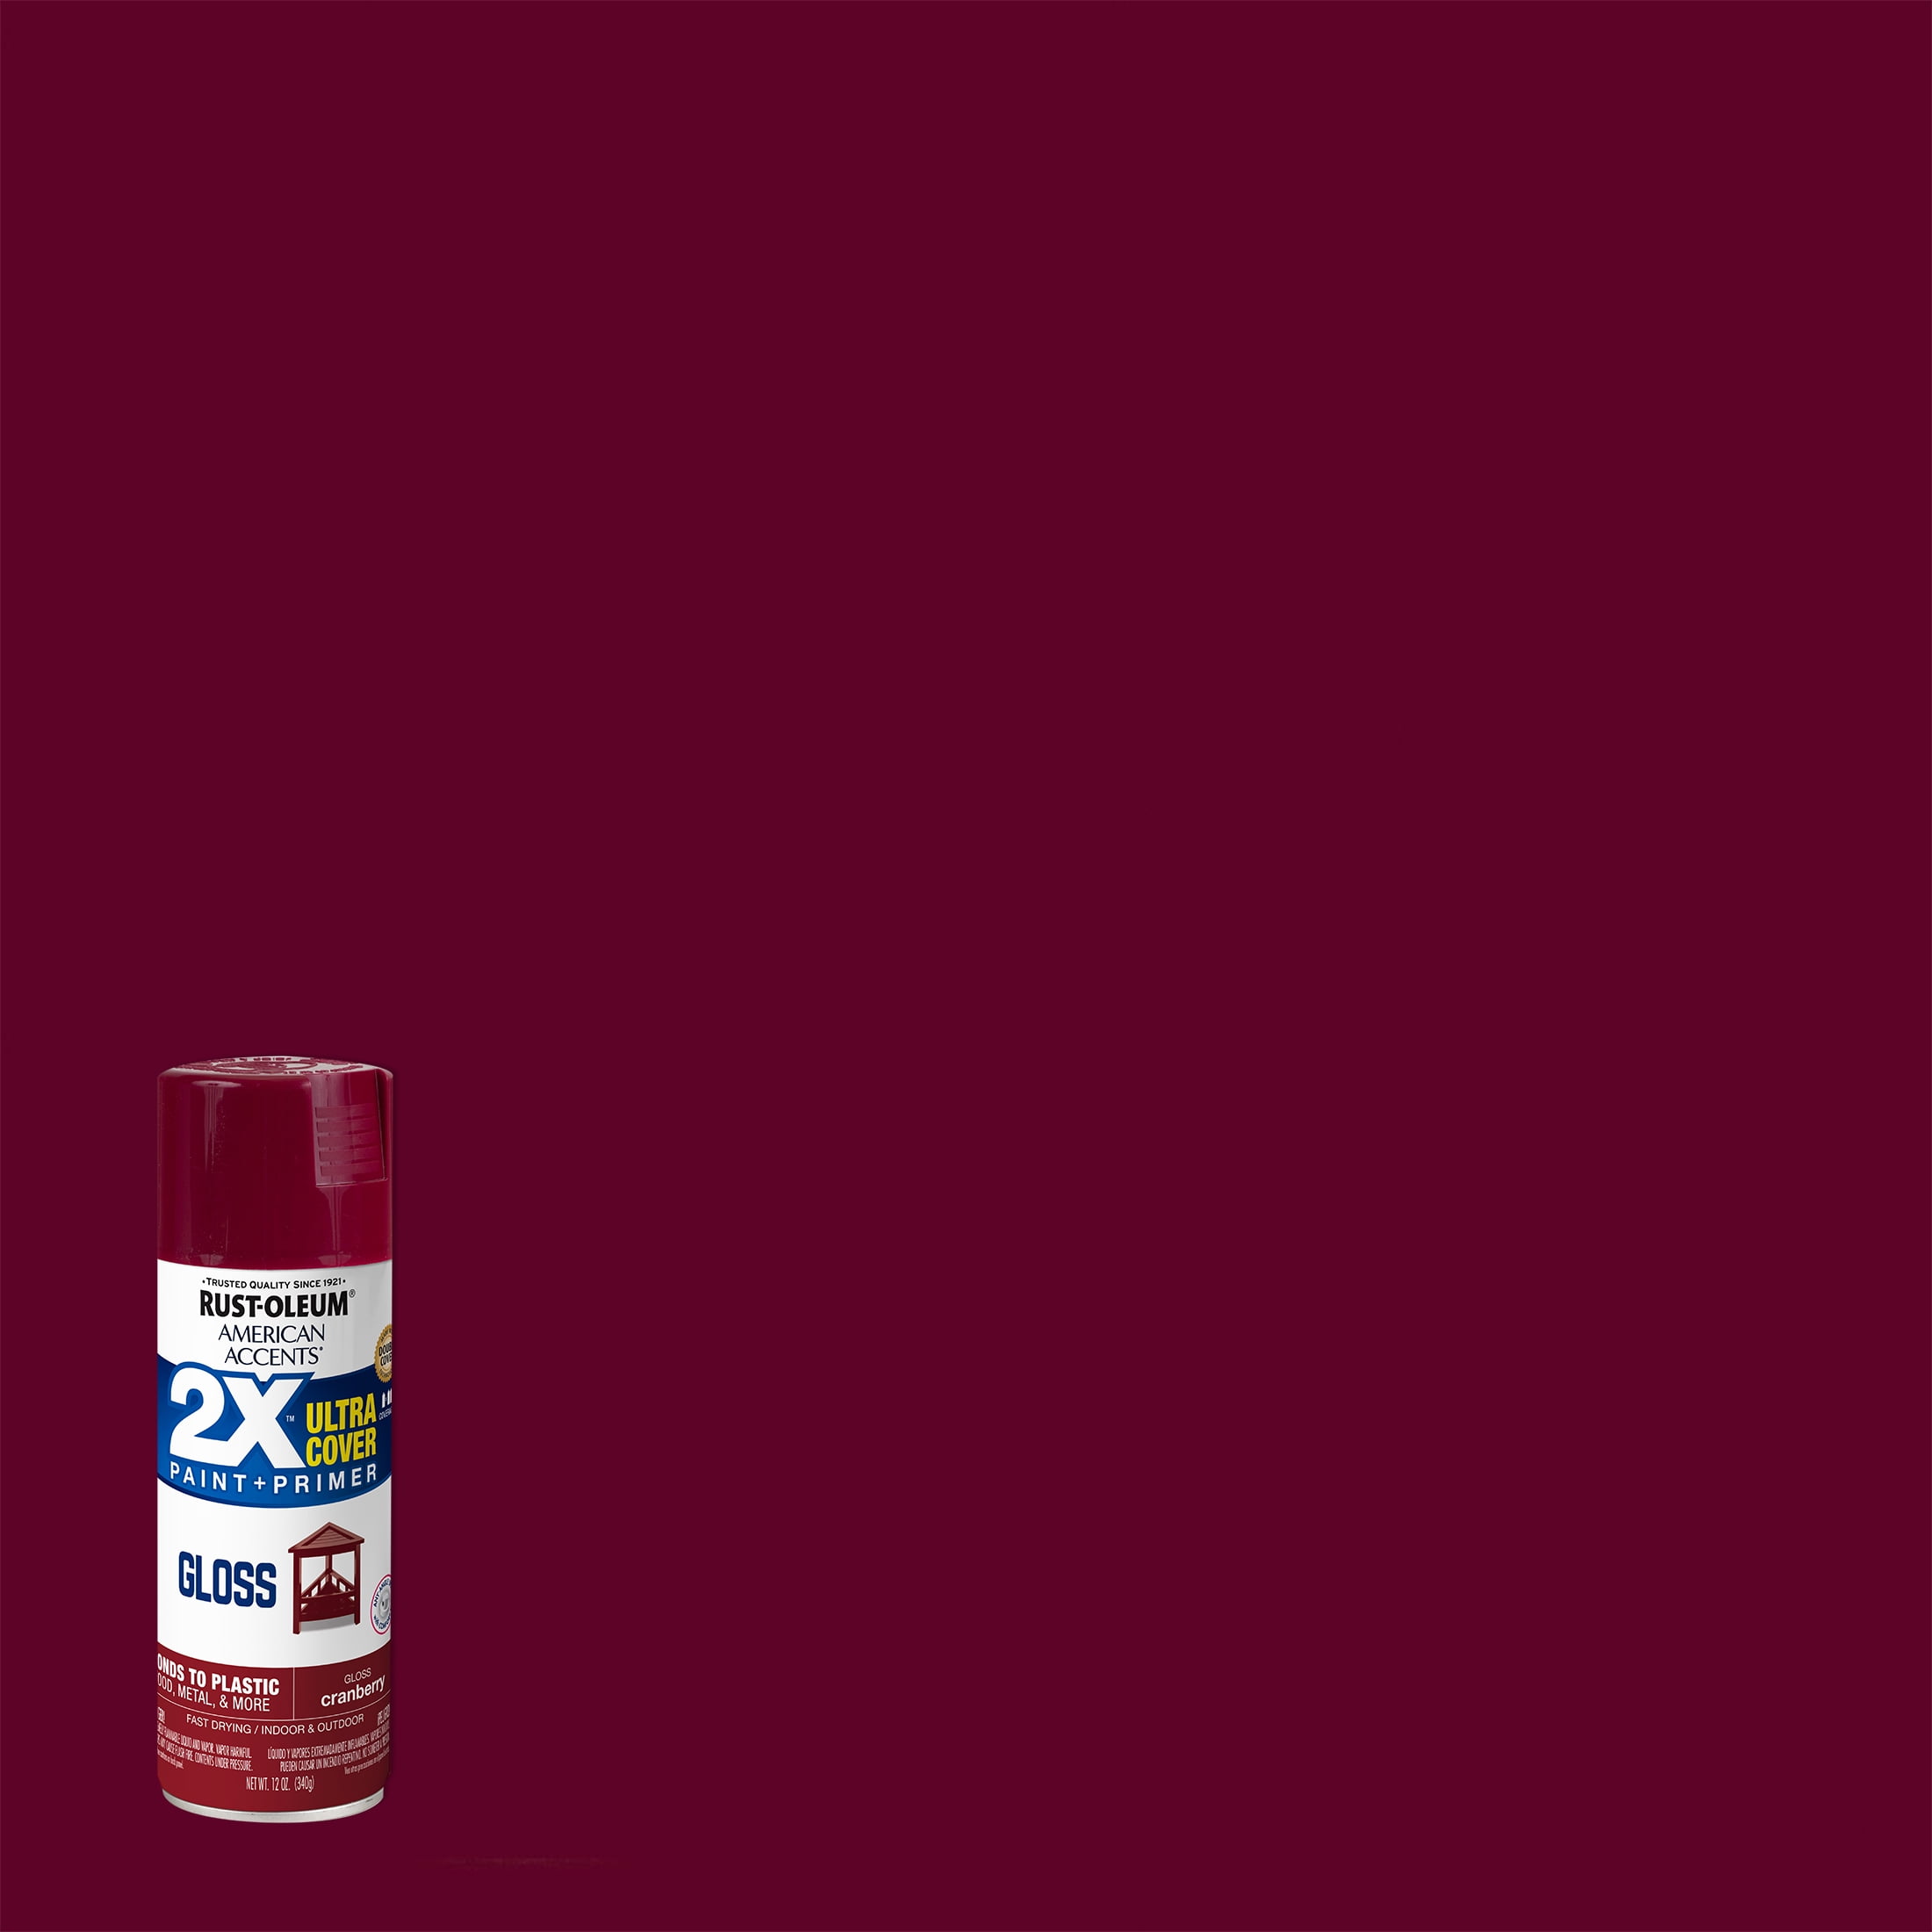 Ocean Mist Rust-Oleum American Accents 2x Ultra Cover Gloss Spray Paint, 6 Pack